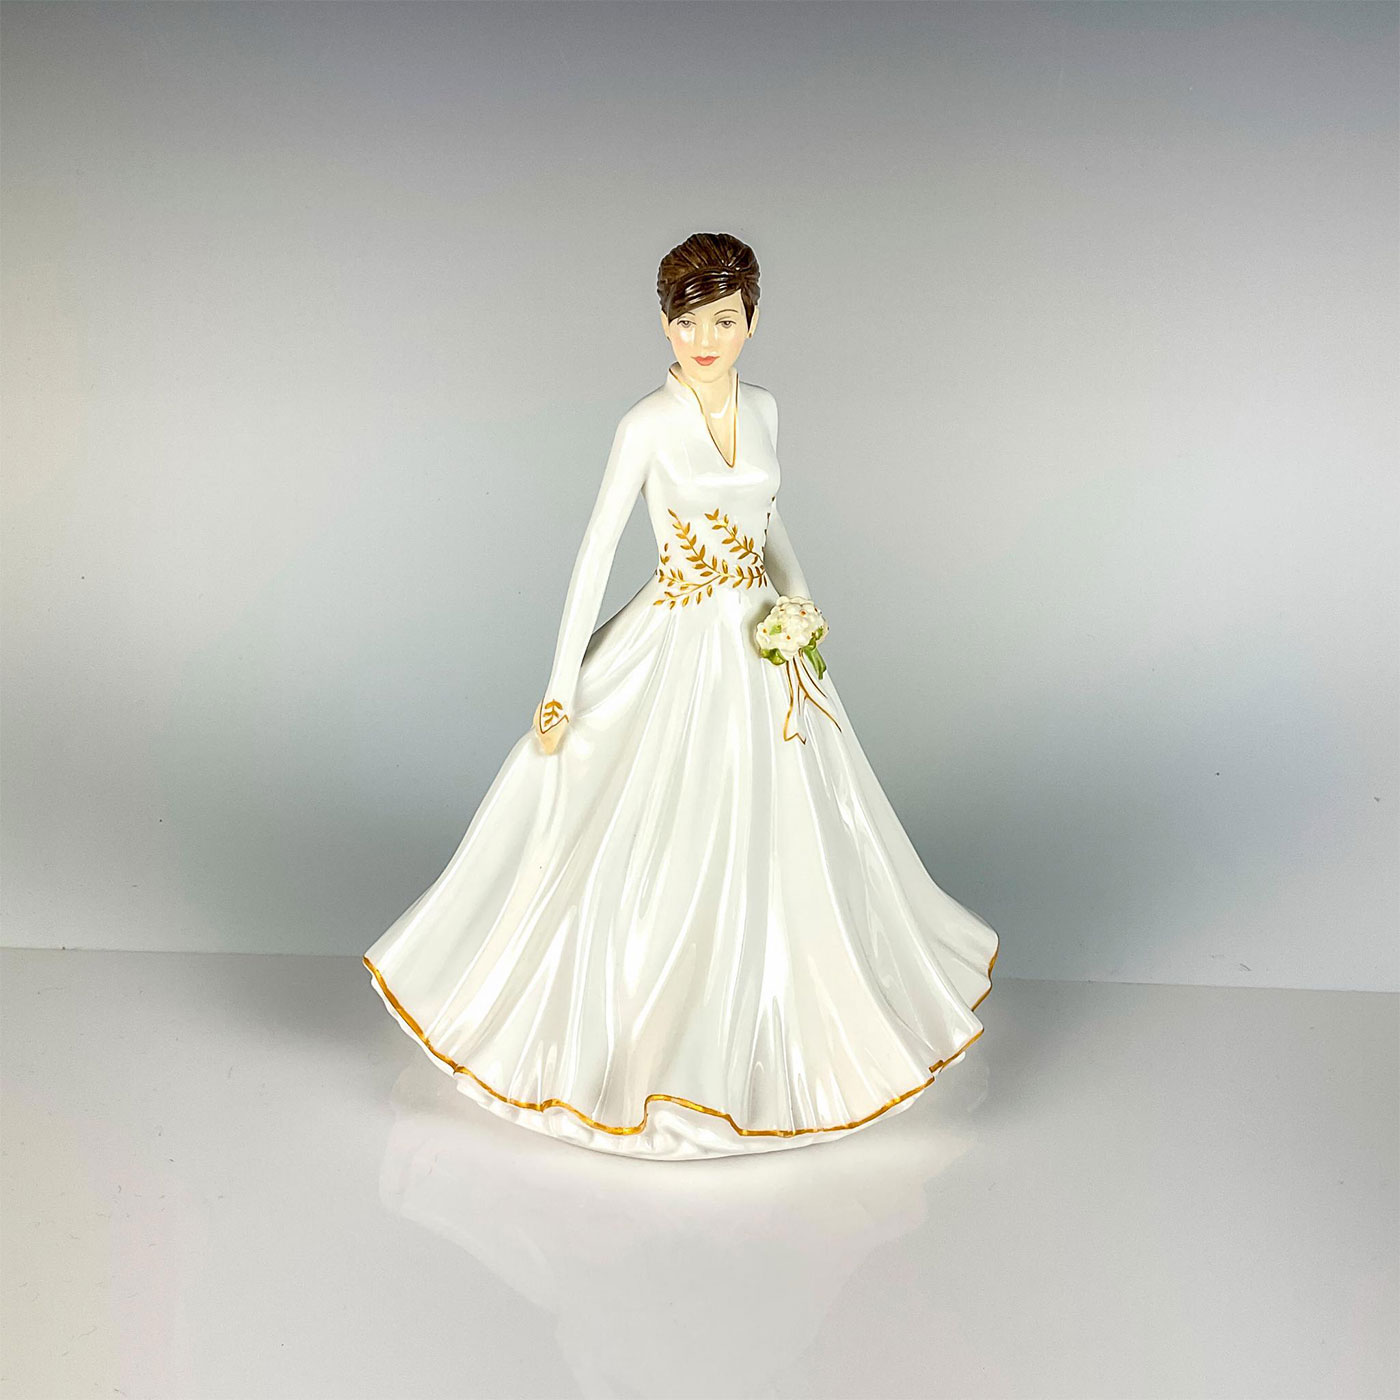 Winter Wonderland HN5639 From the Songs of Christmas Collection - Royal Doulton Figurine